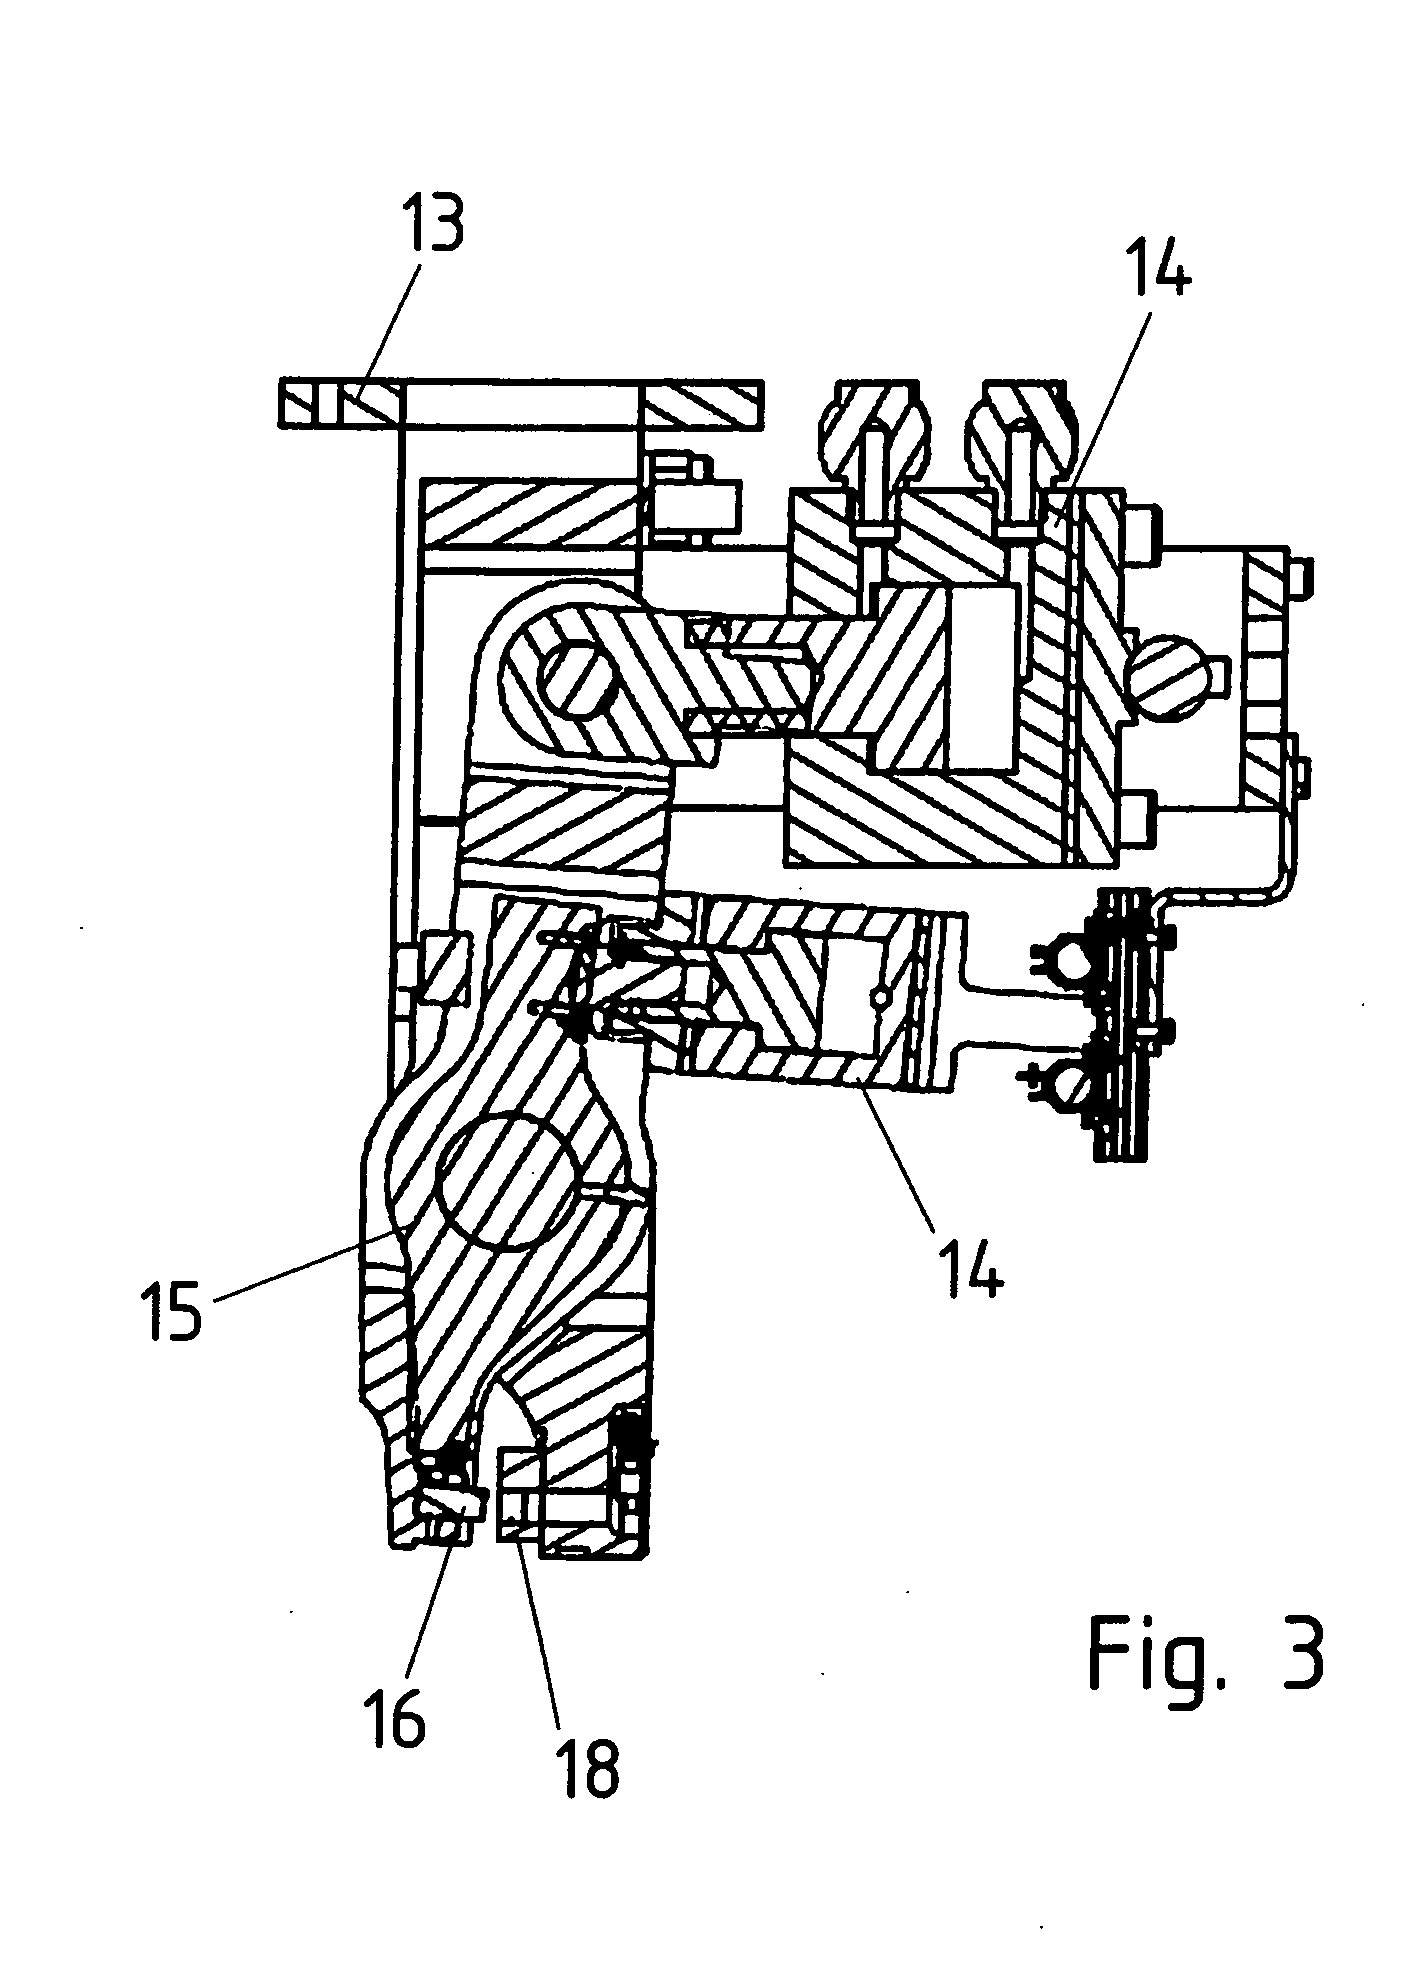 Apparatus and method of perforating a component